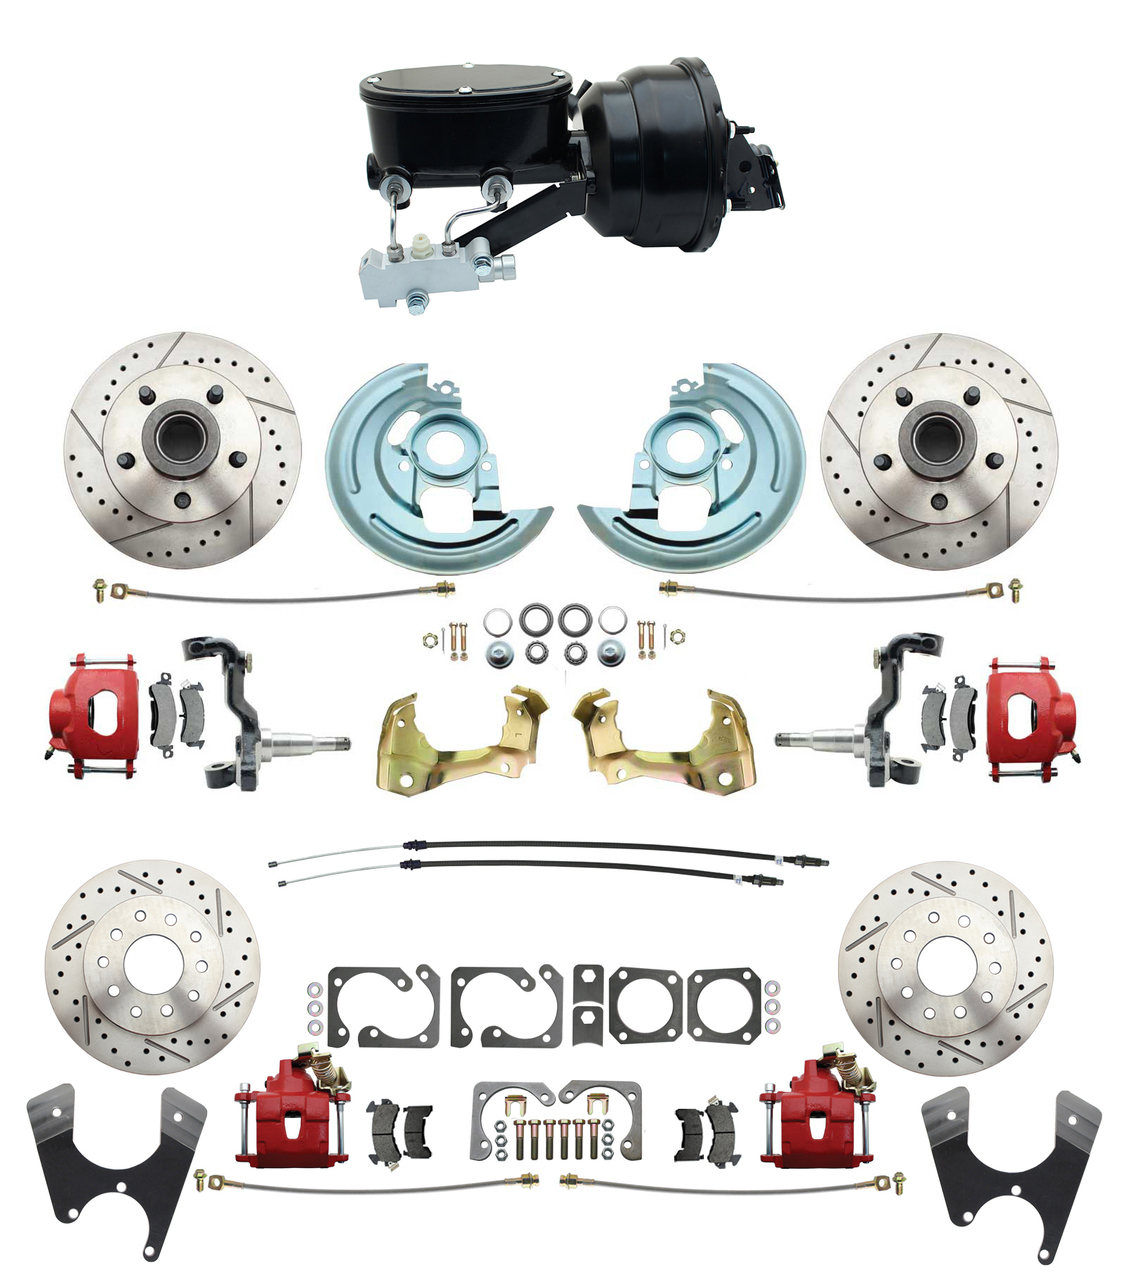 1967-1969 Camaro/ Firebird & 1968-1974 Chevy Nova Front & Rear Power Disc Brake Conversion Kit Drilled & Slotted & Powder Coated Red Calipers Rotors W/ Wilwood Style 8 Dual Powder Coated Black Booster Kit